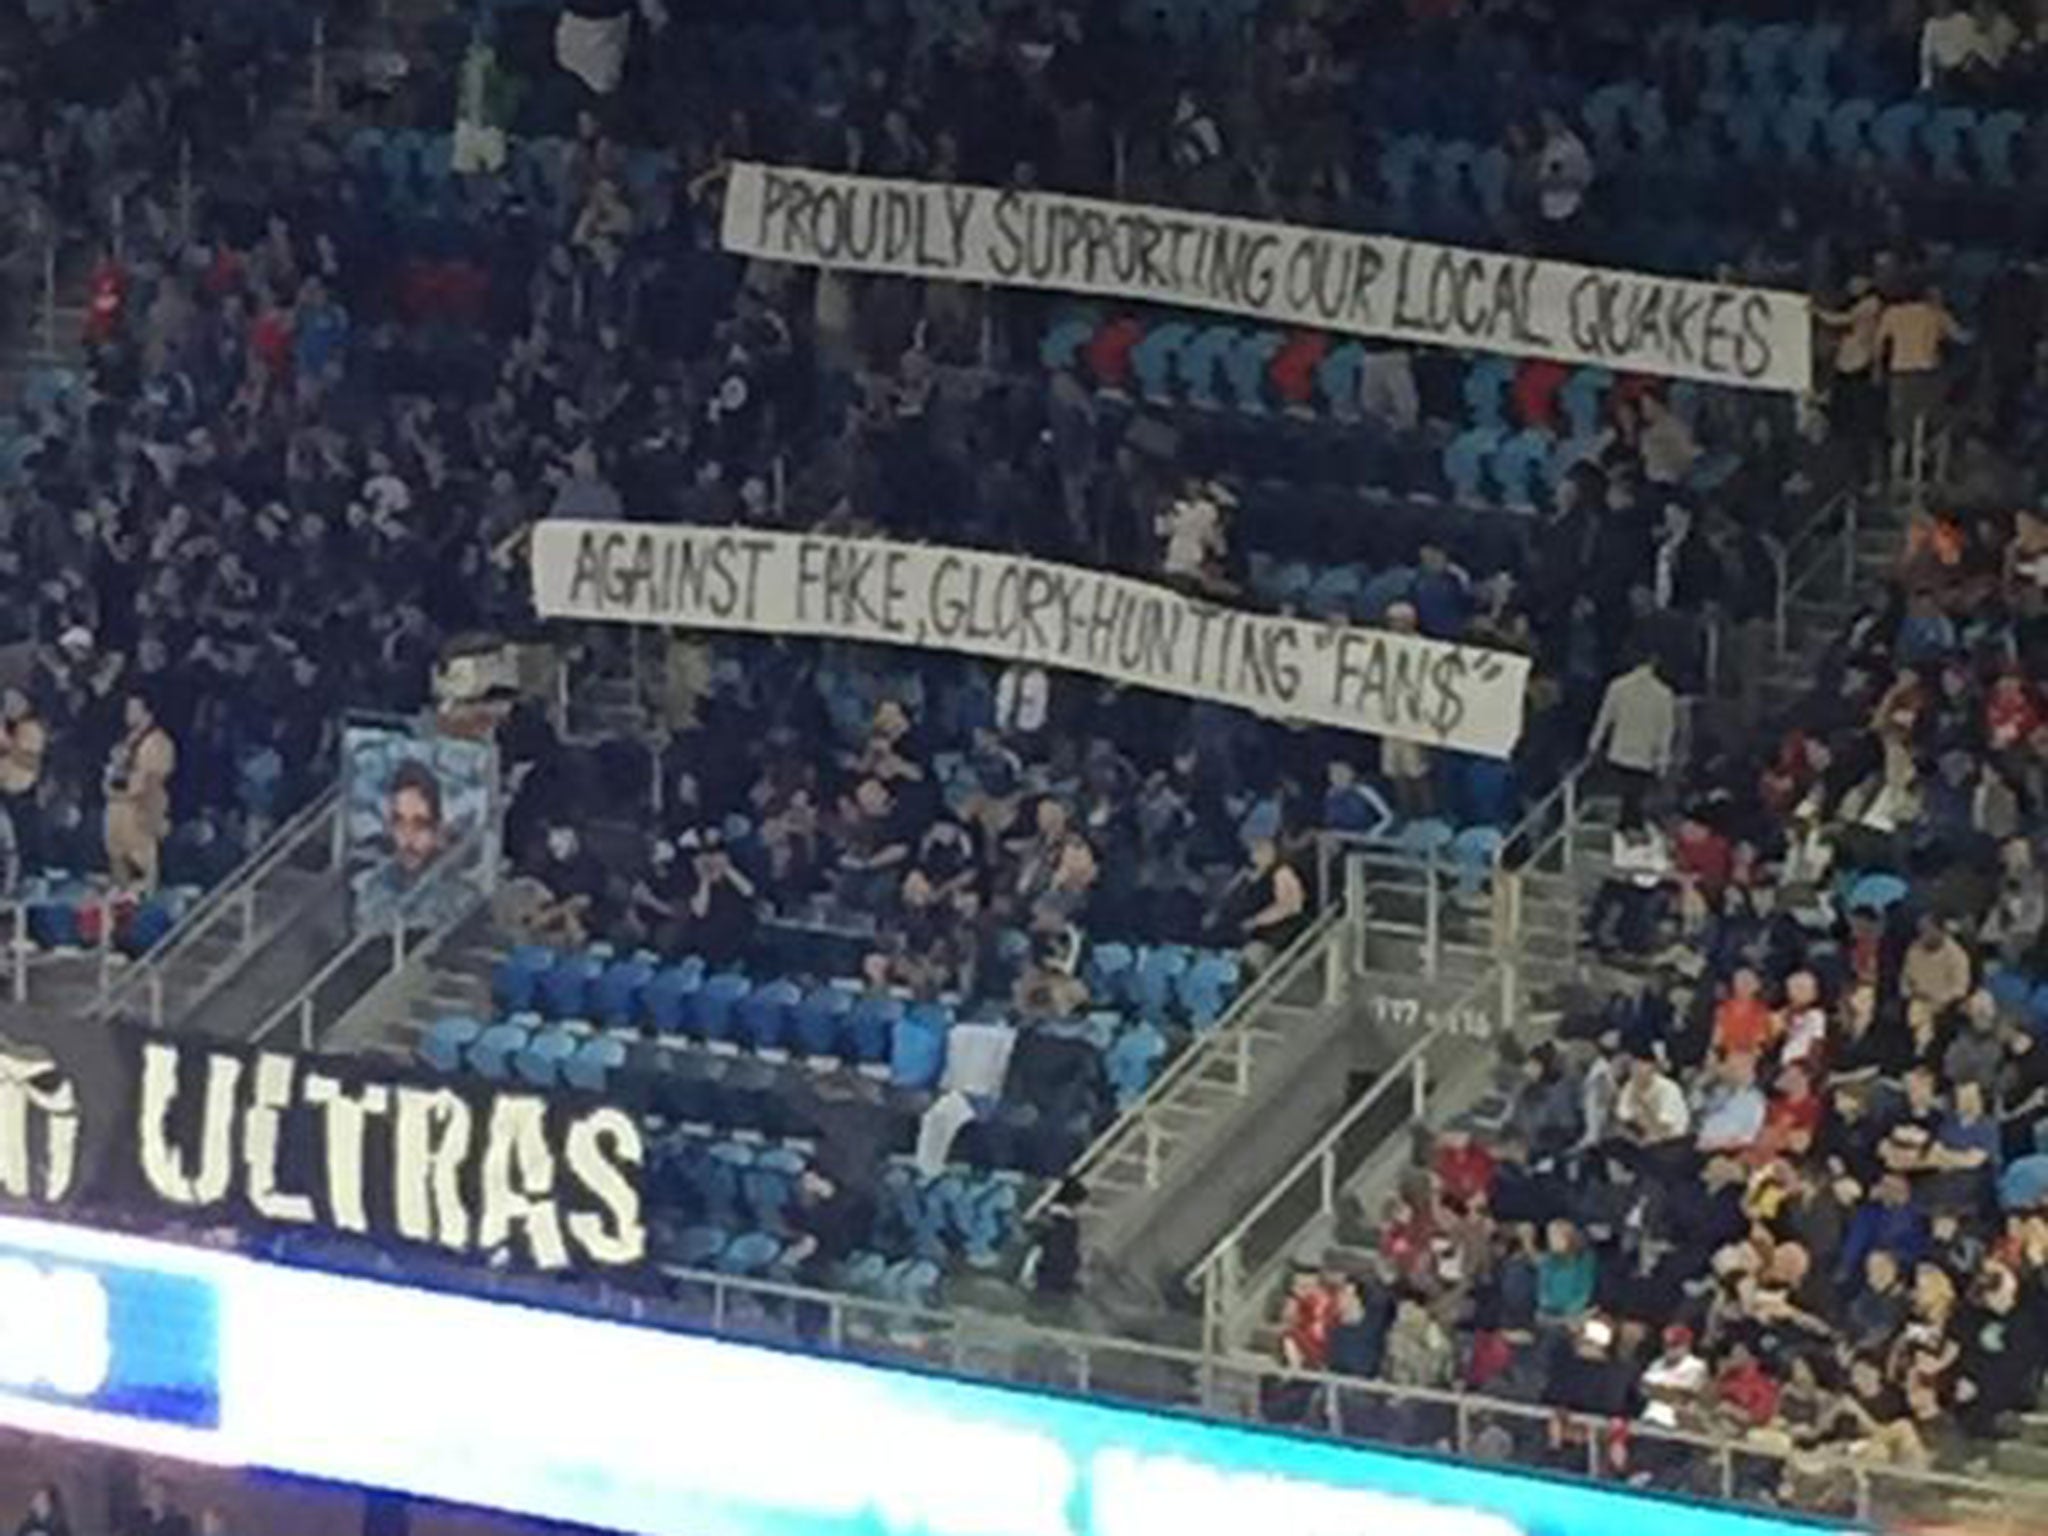 San Jose Earthquakes' fans display a banner to jibe Manchester United supporters